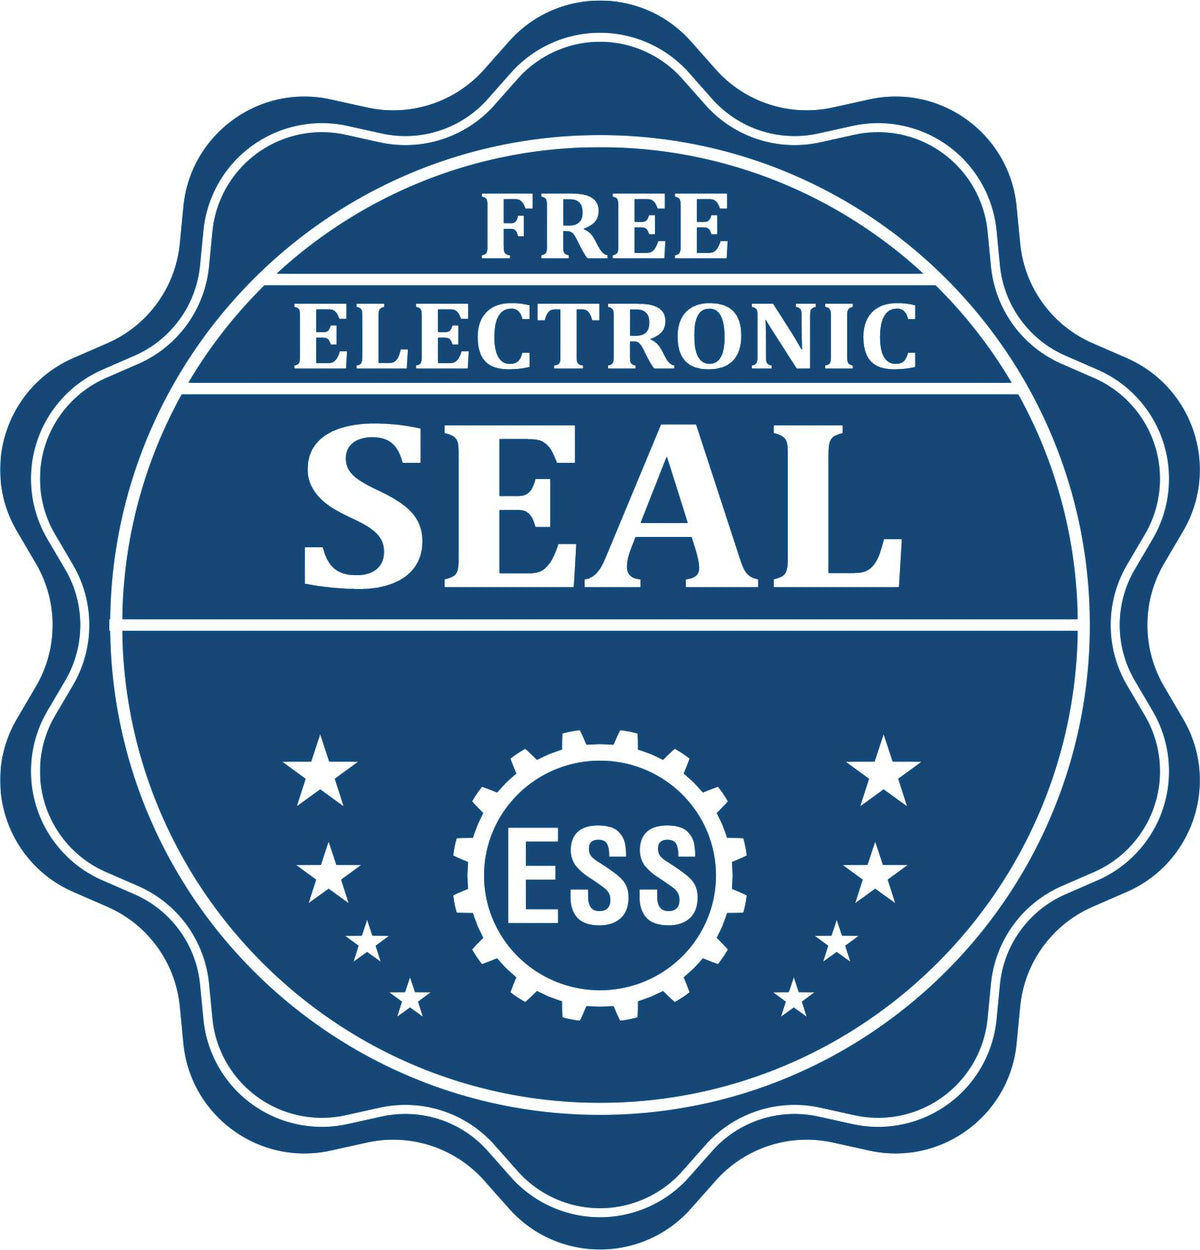 A badge showing a free electronic seal for the MaxLight Premium Pre-Inked Oklahoma State Seal Notarial Stamp with stars and the ESS gear on the emblem.